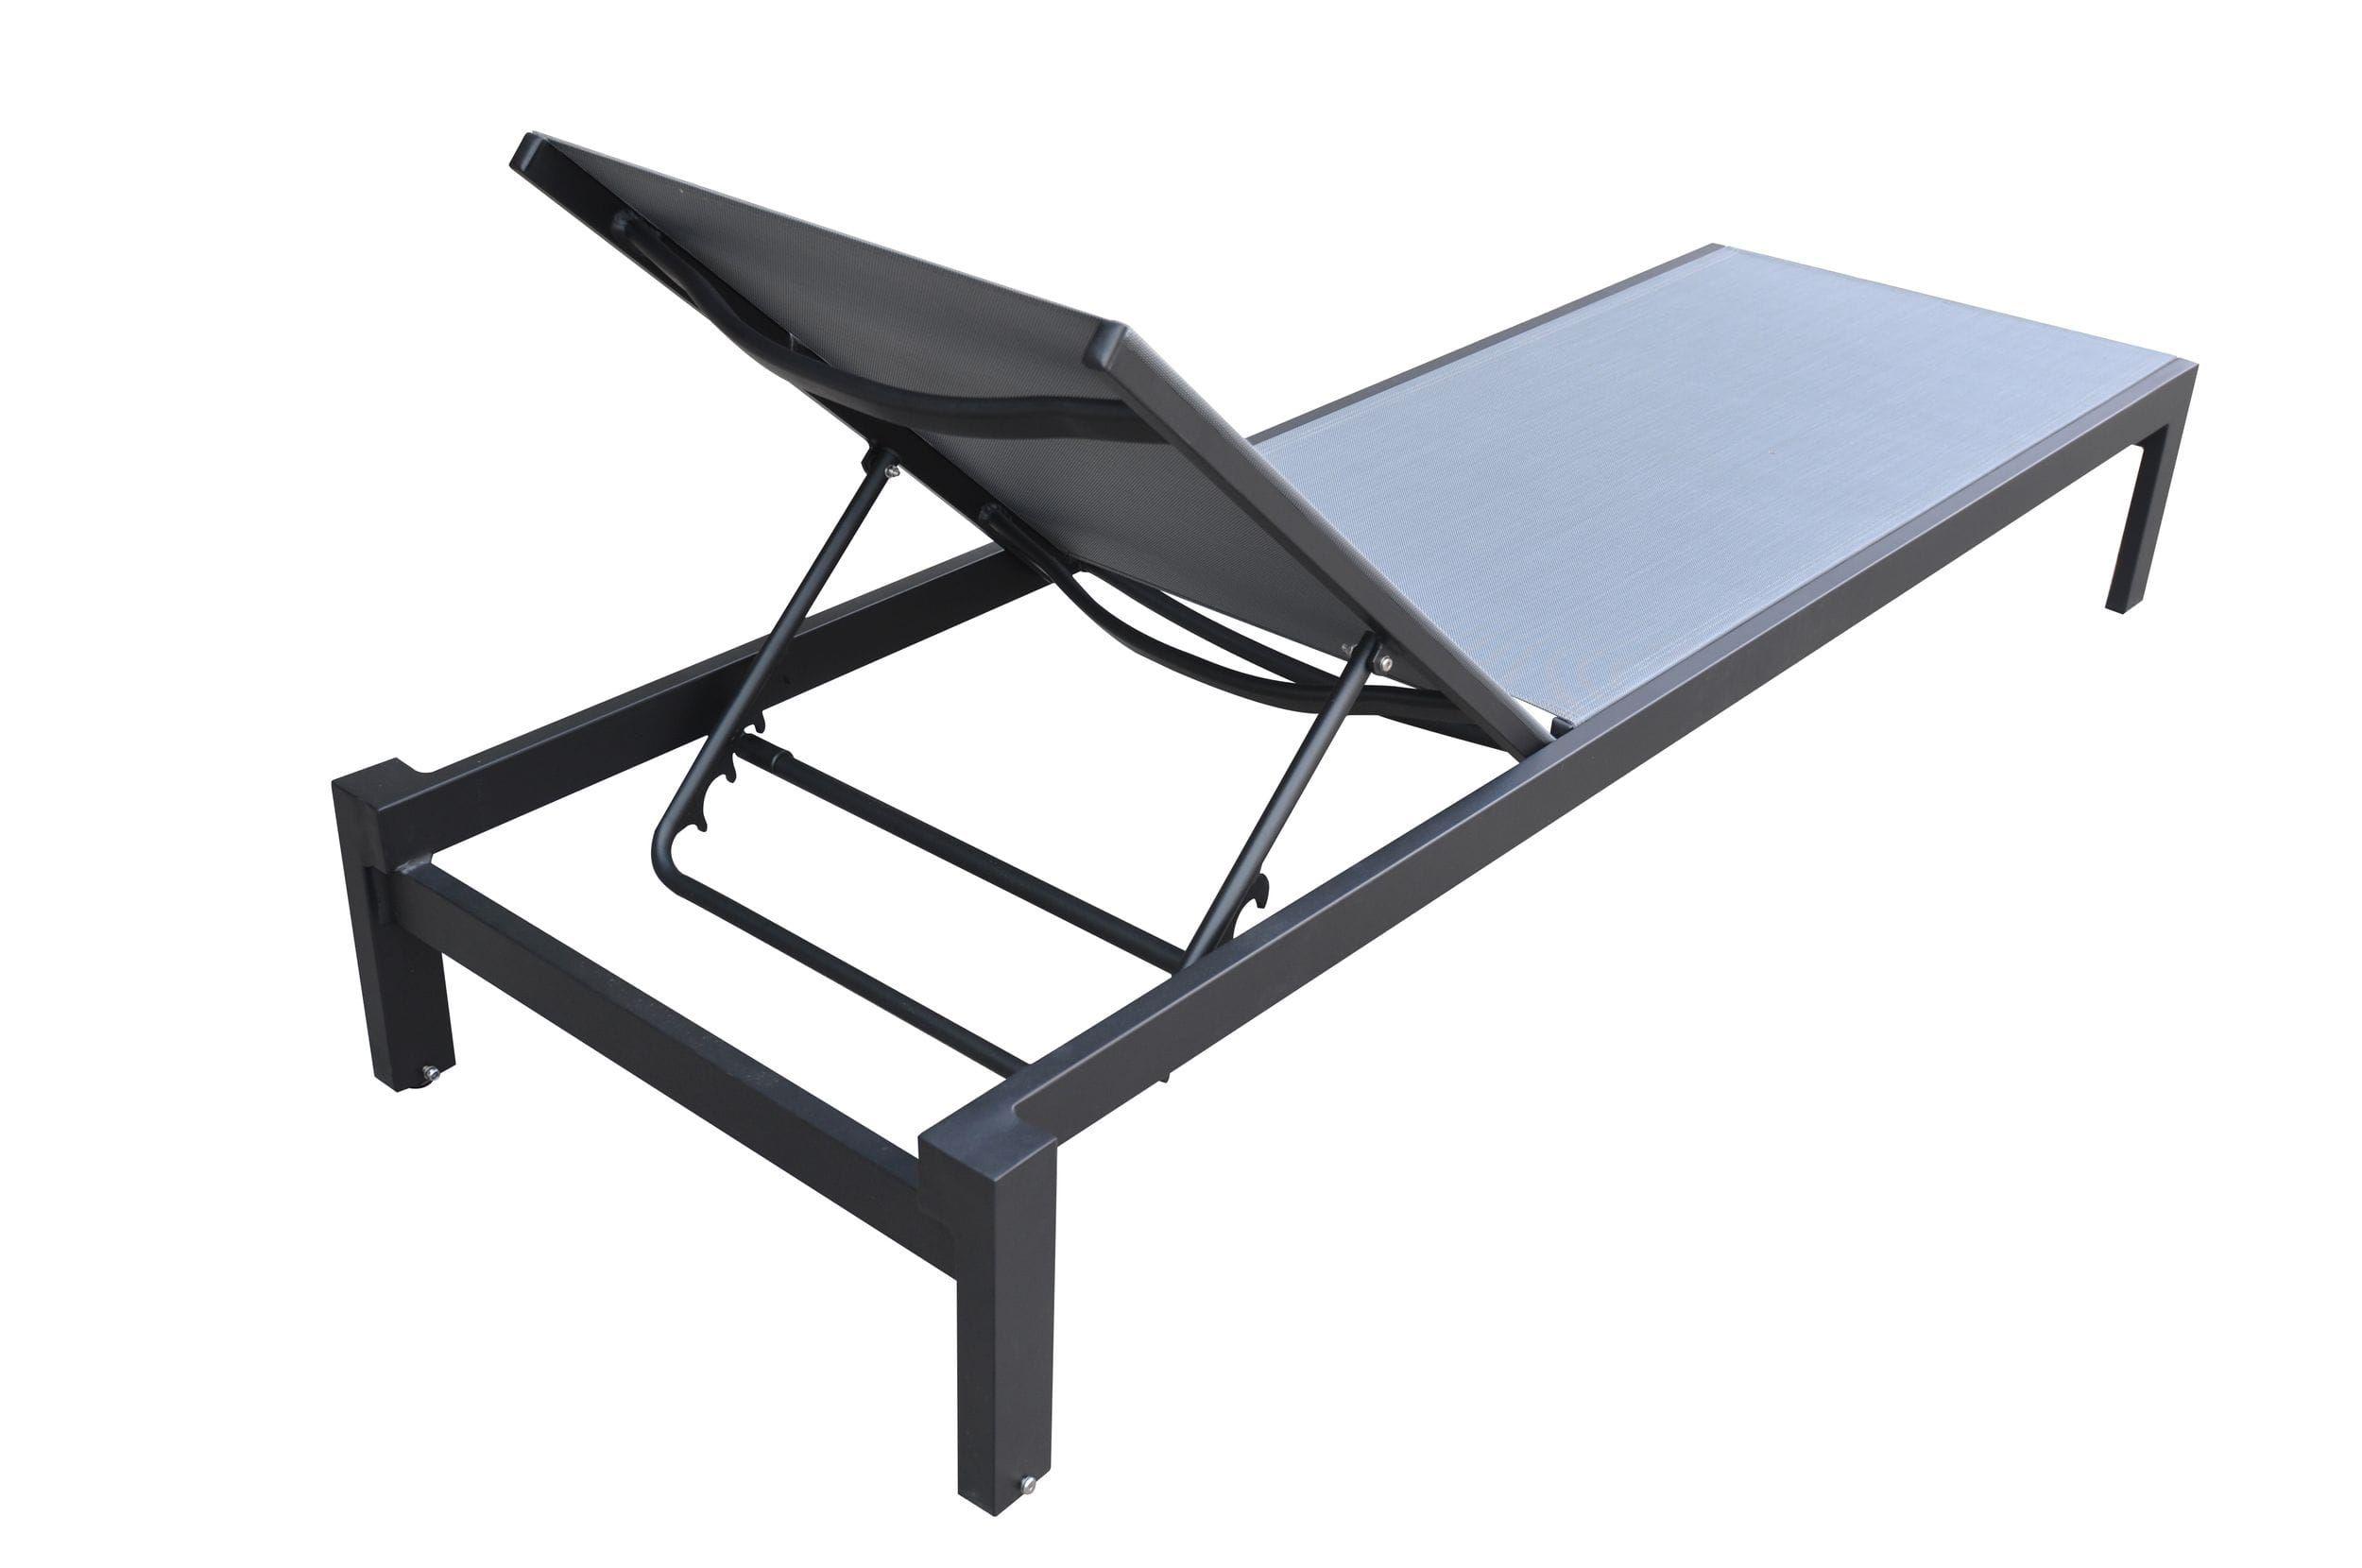 

    
VGGEAGEAN-GRY VIG Furniture Outdoor Chaise Lounger
